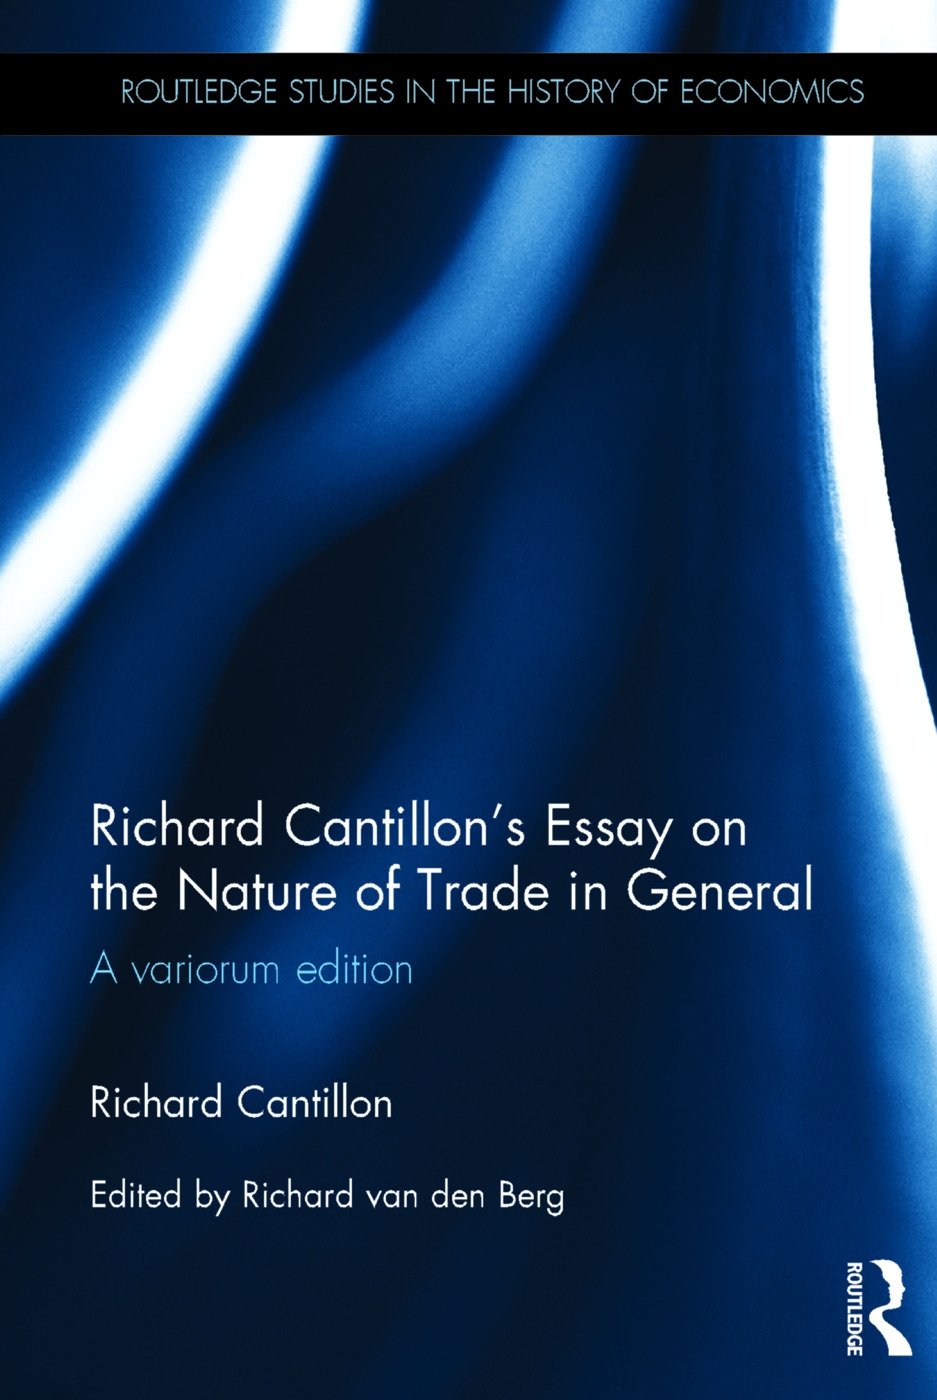 Richard Cantillon’s Essay on the Nature of Trade in General: A Variorum Edition